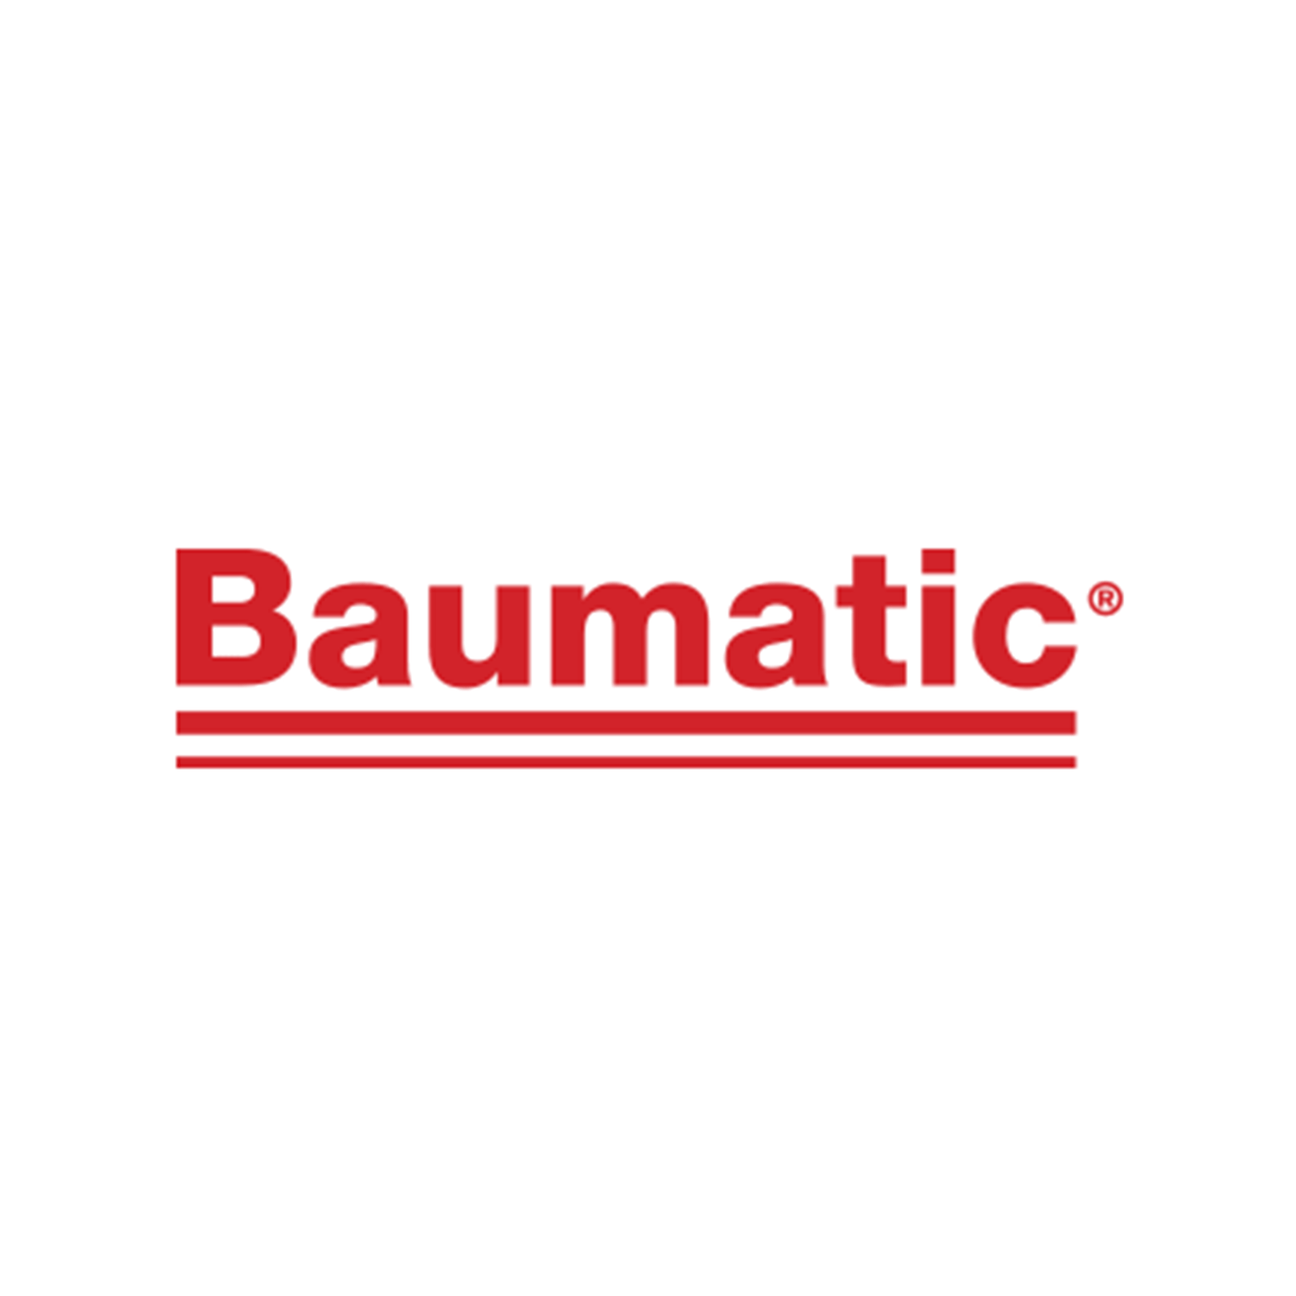 Baumatic Cooktop & Oven Parts - My Oven Spares